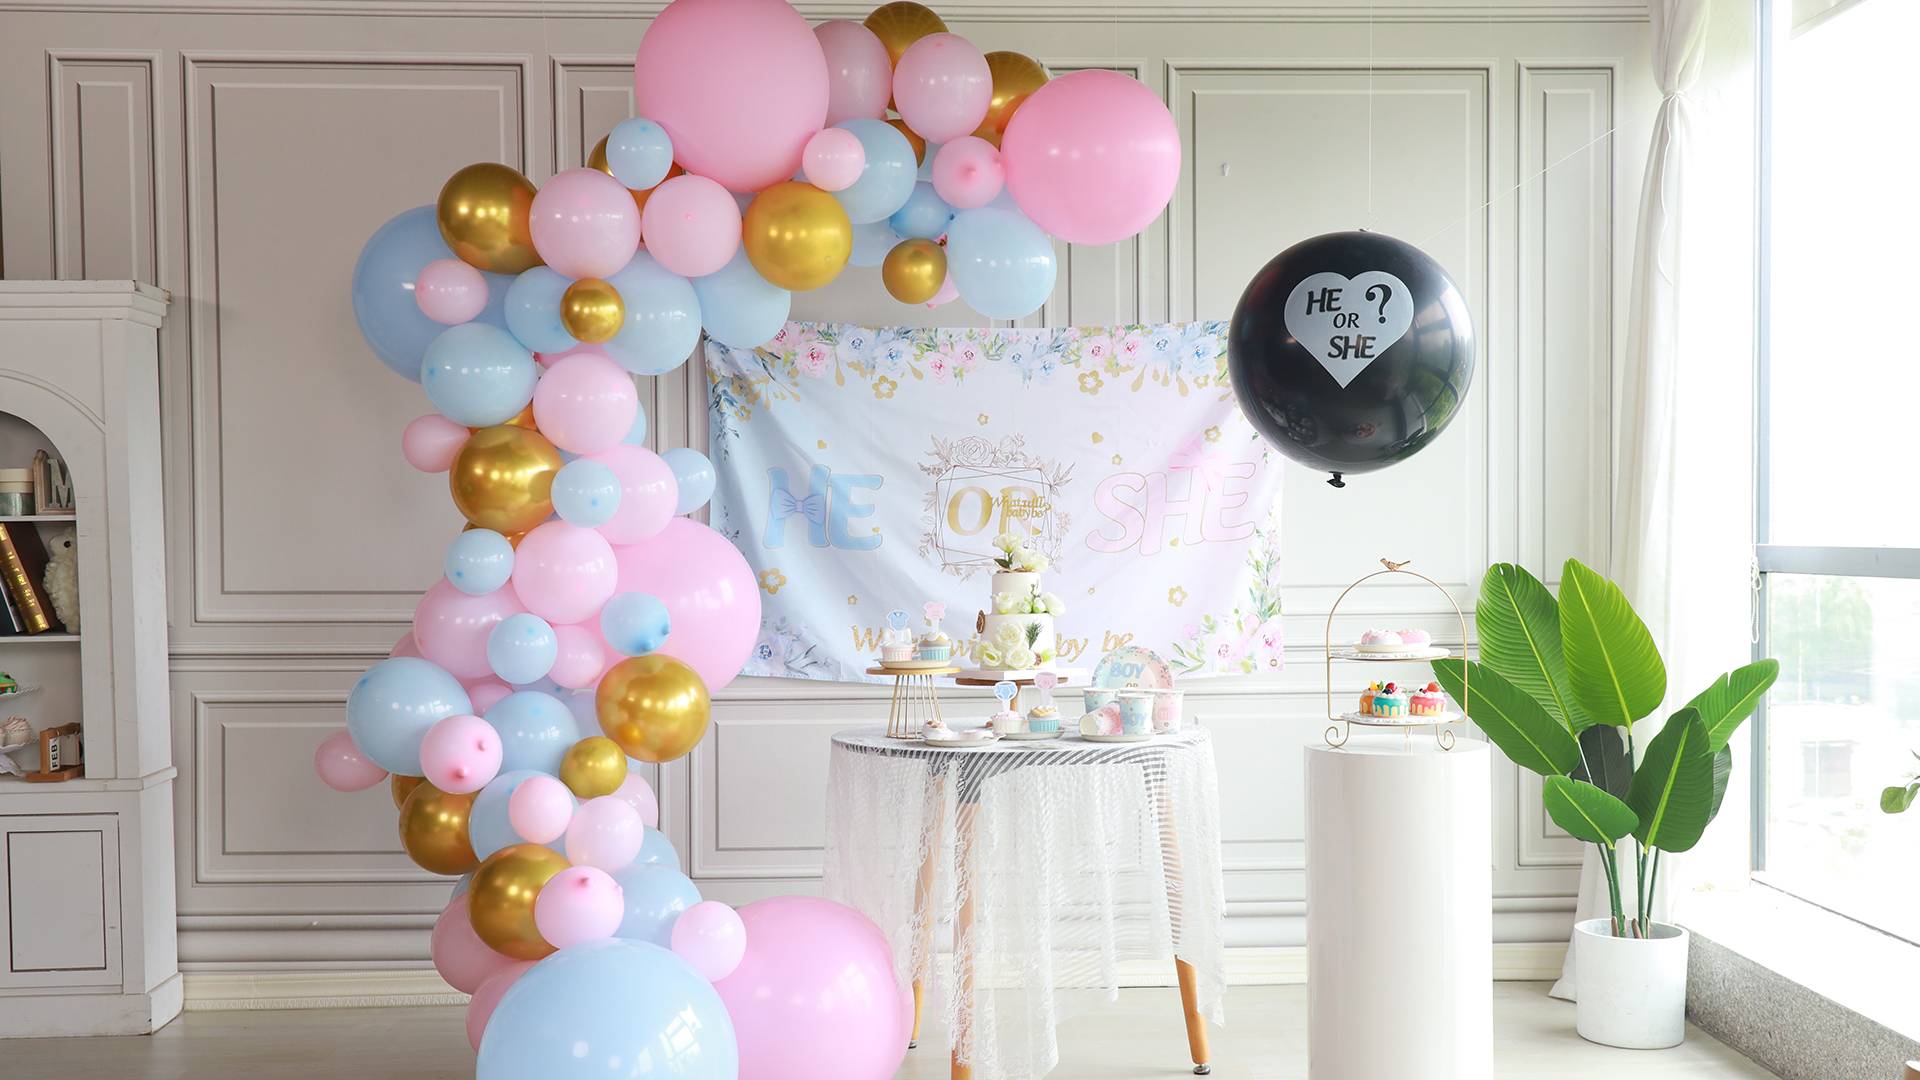  A stunning latex balloon arch designed specifically for a gender reveal celebration. 